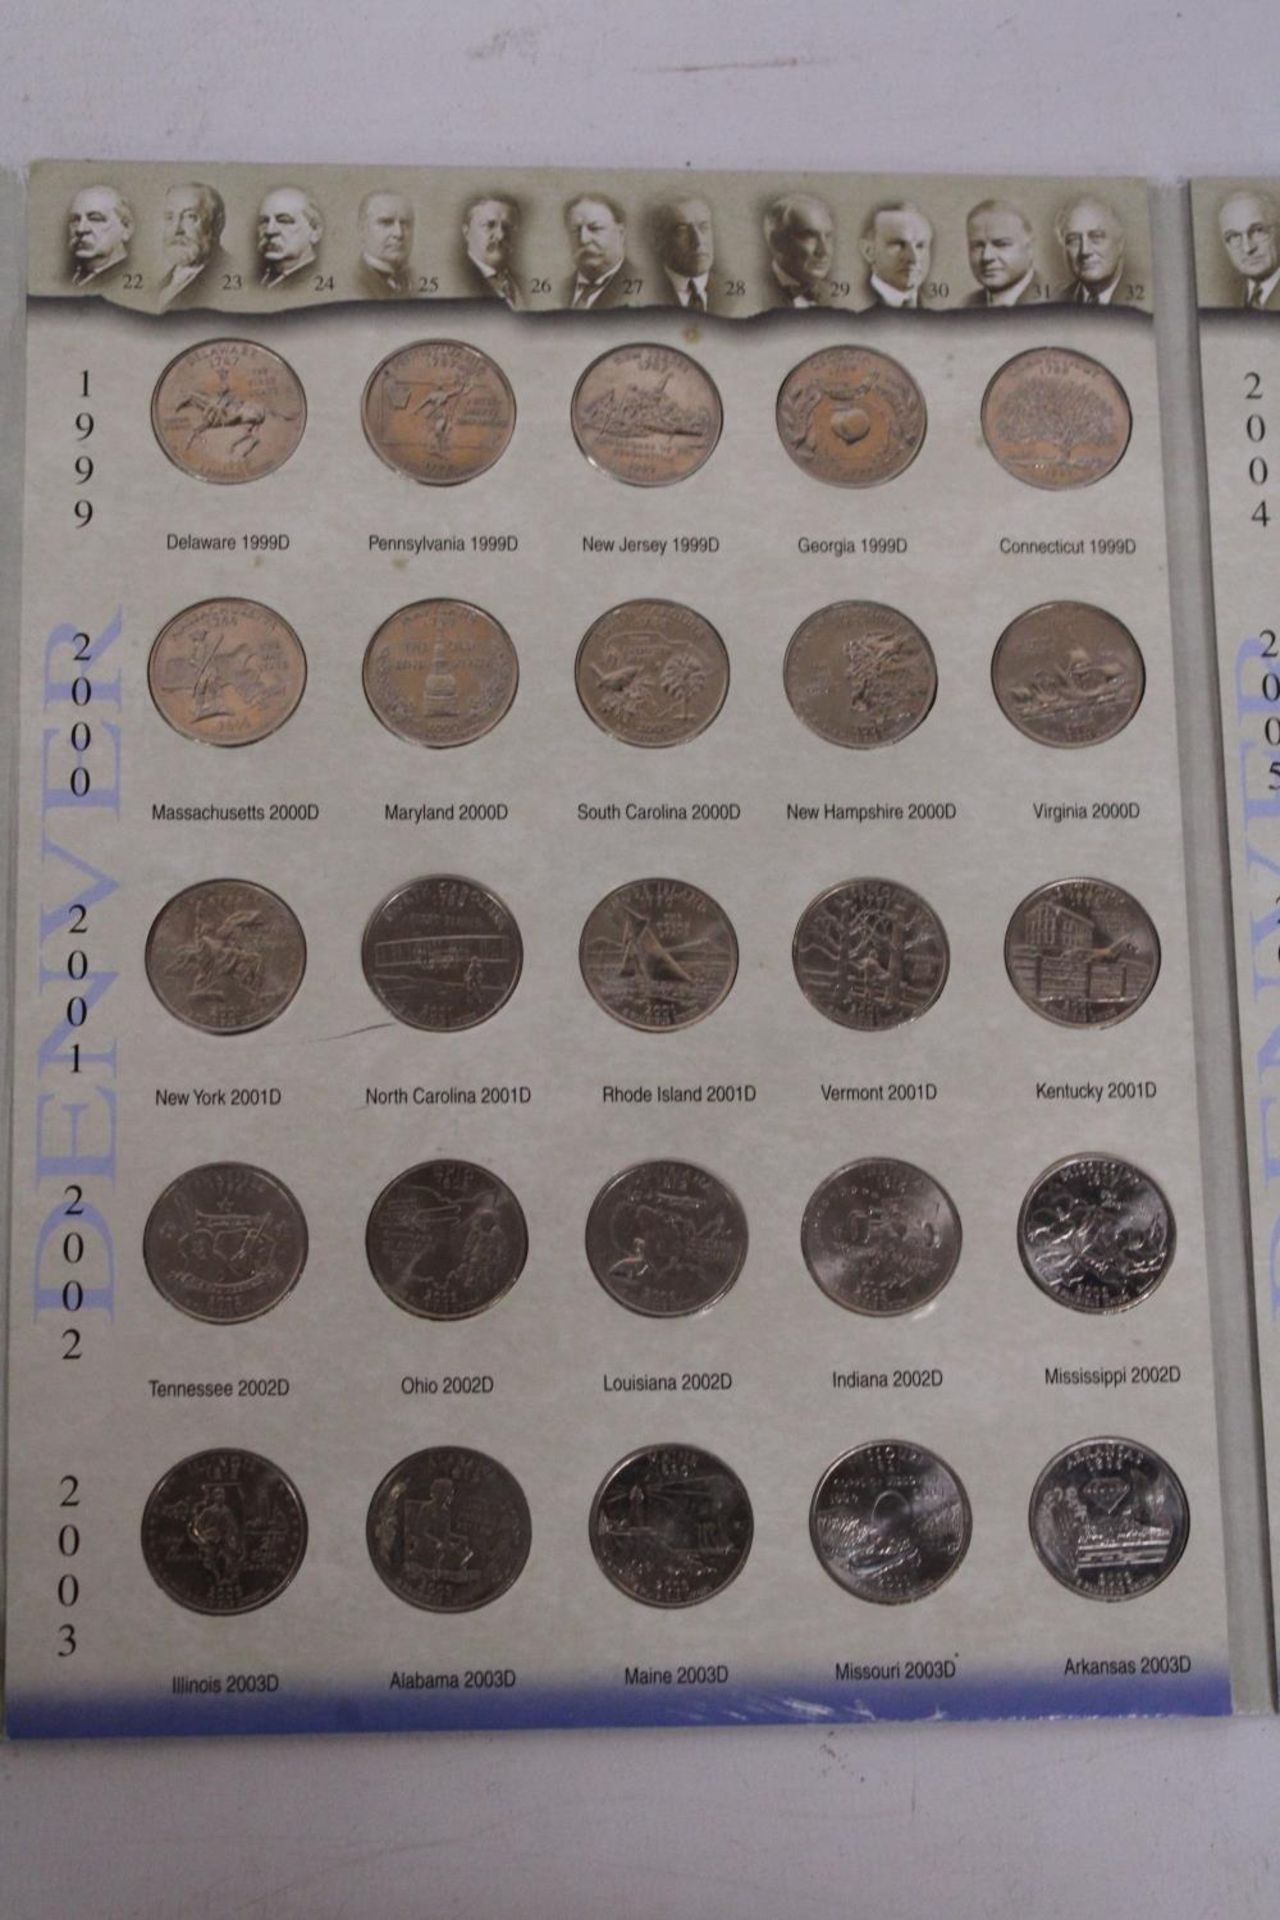 USA , STATE SERIES QUARTERS , COMPLETE 100 COIN SET , 1999-2008 , PHILADELPHIA AND DENVER MINT - Image 3 of 5